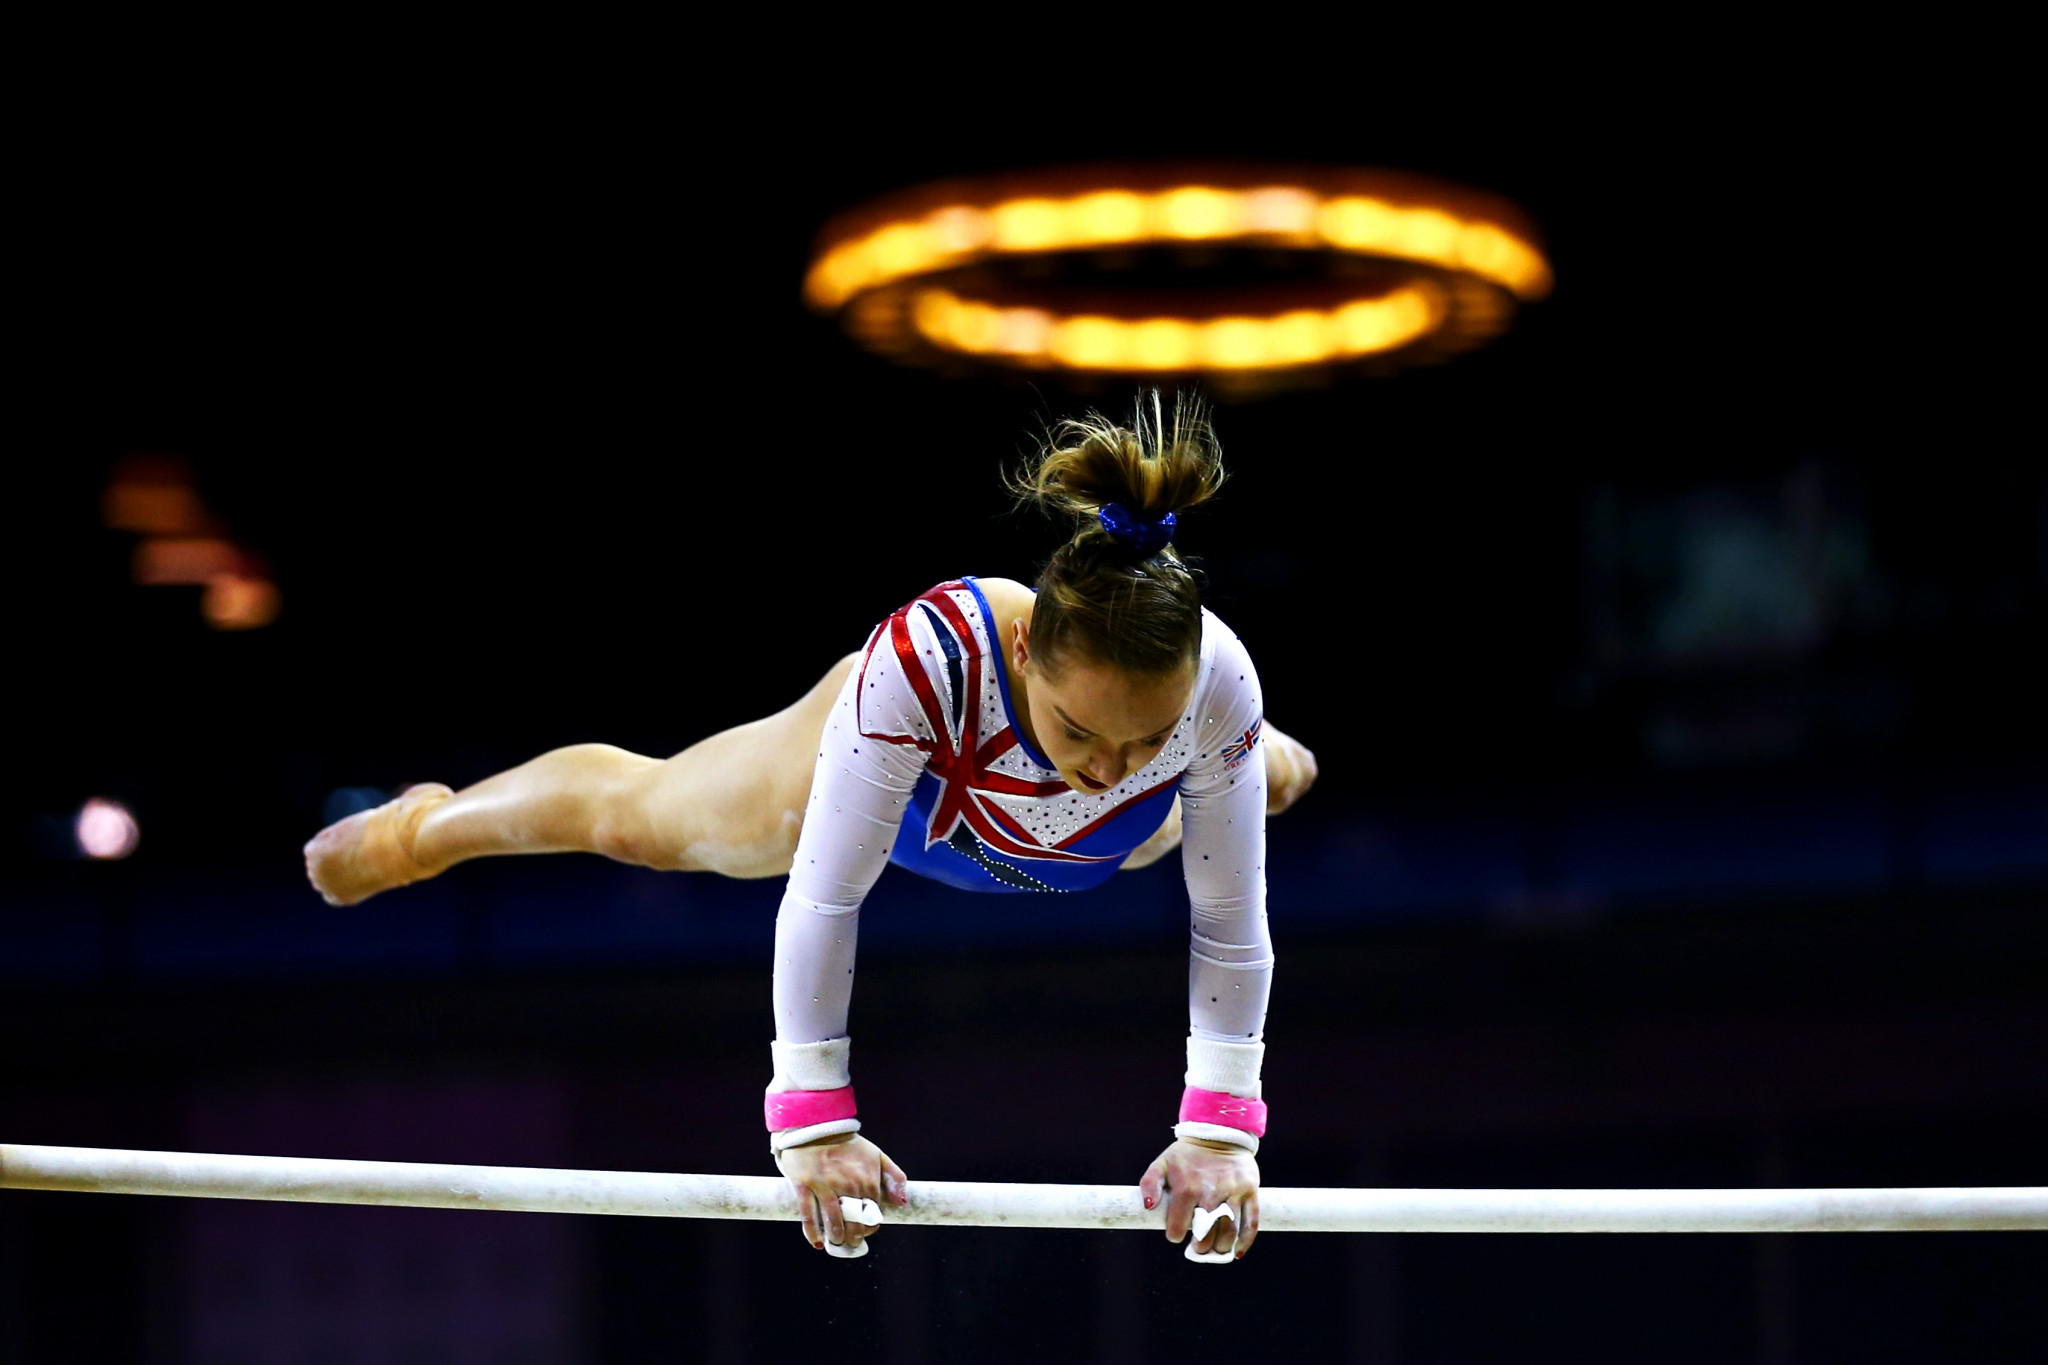 Tinkler claims she would "give up" Olympic medal to change gymnastics experience